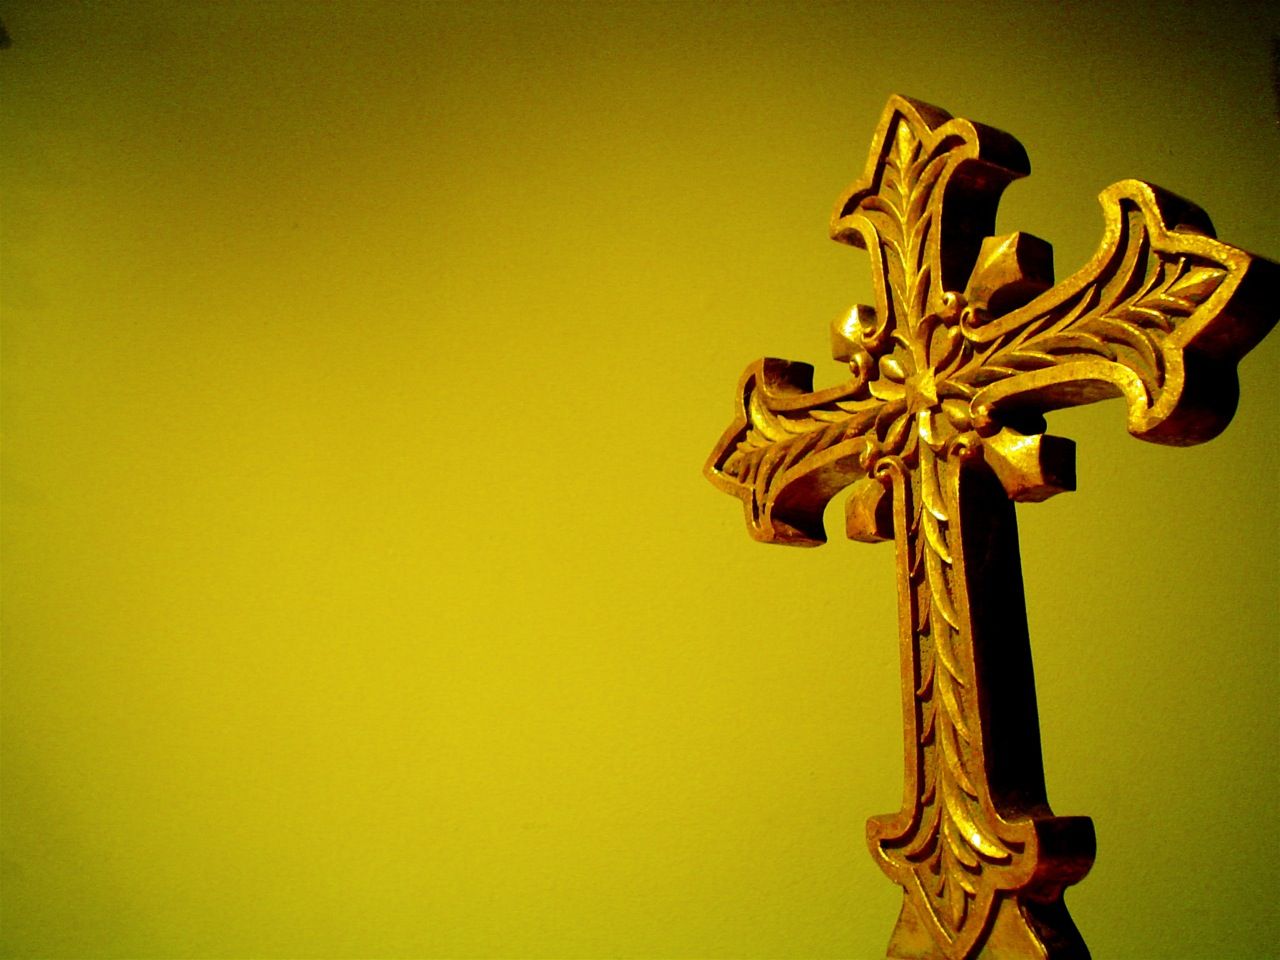 Christian Backgrounds Group 67